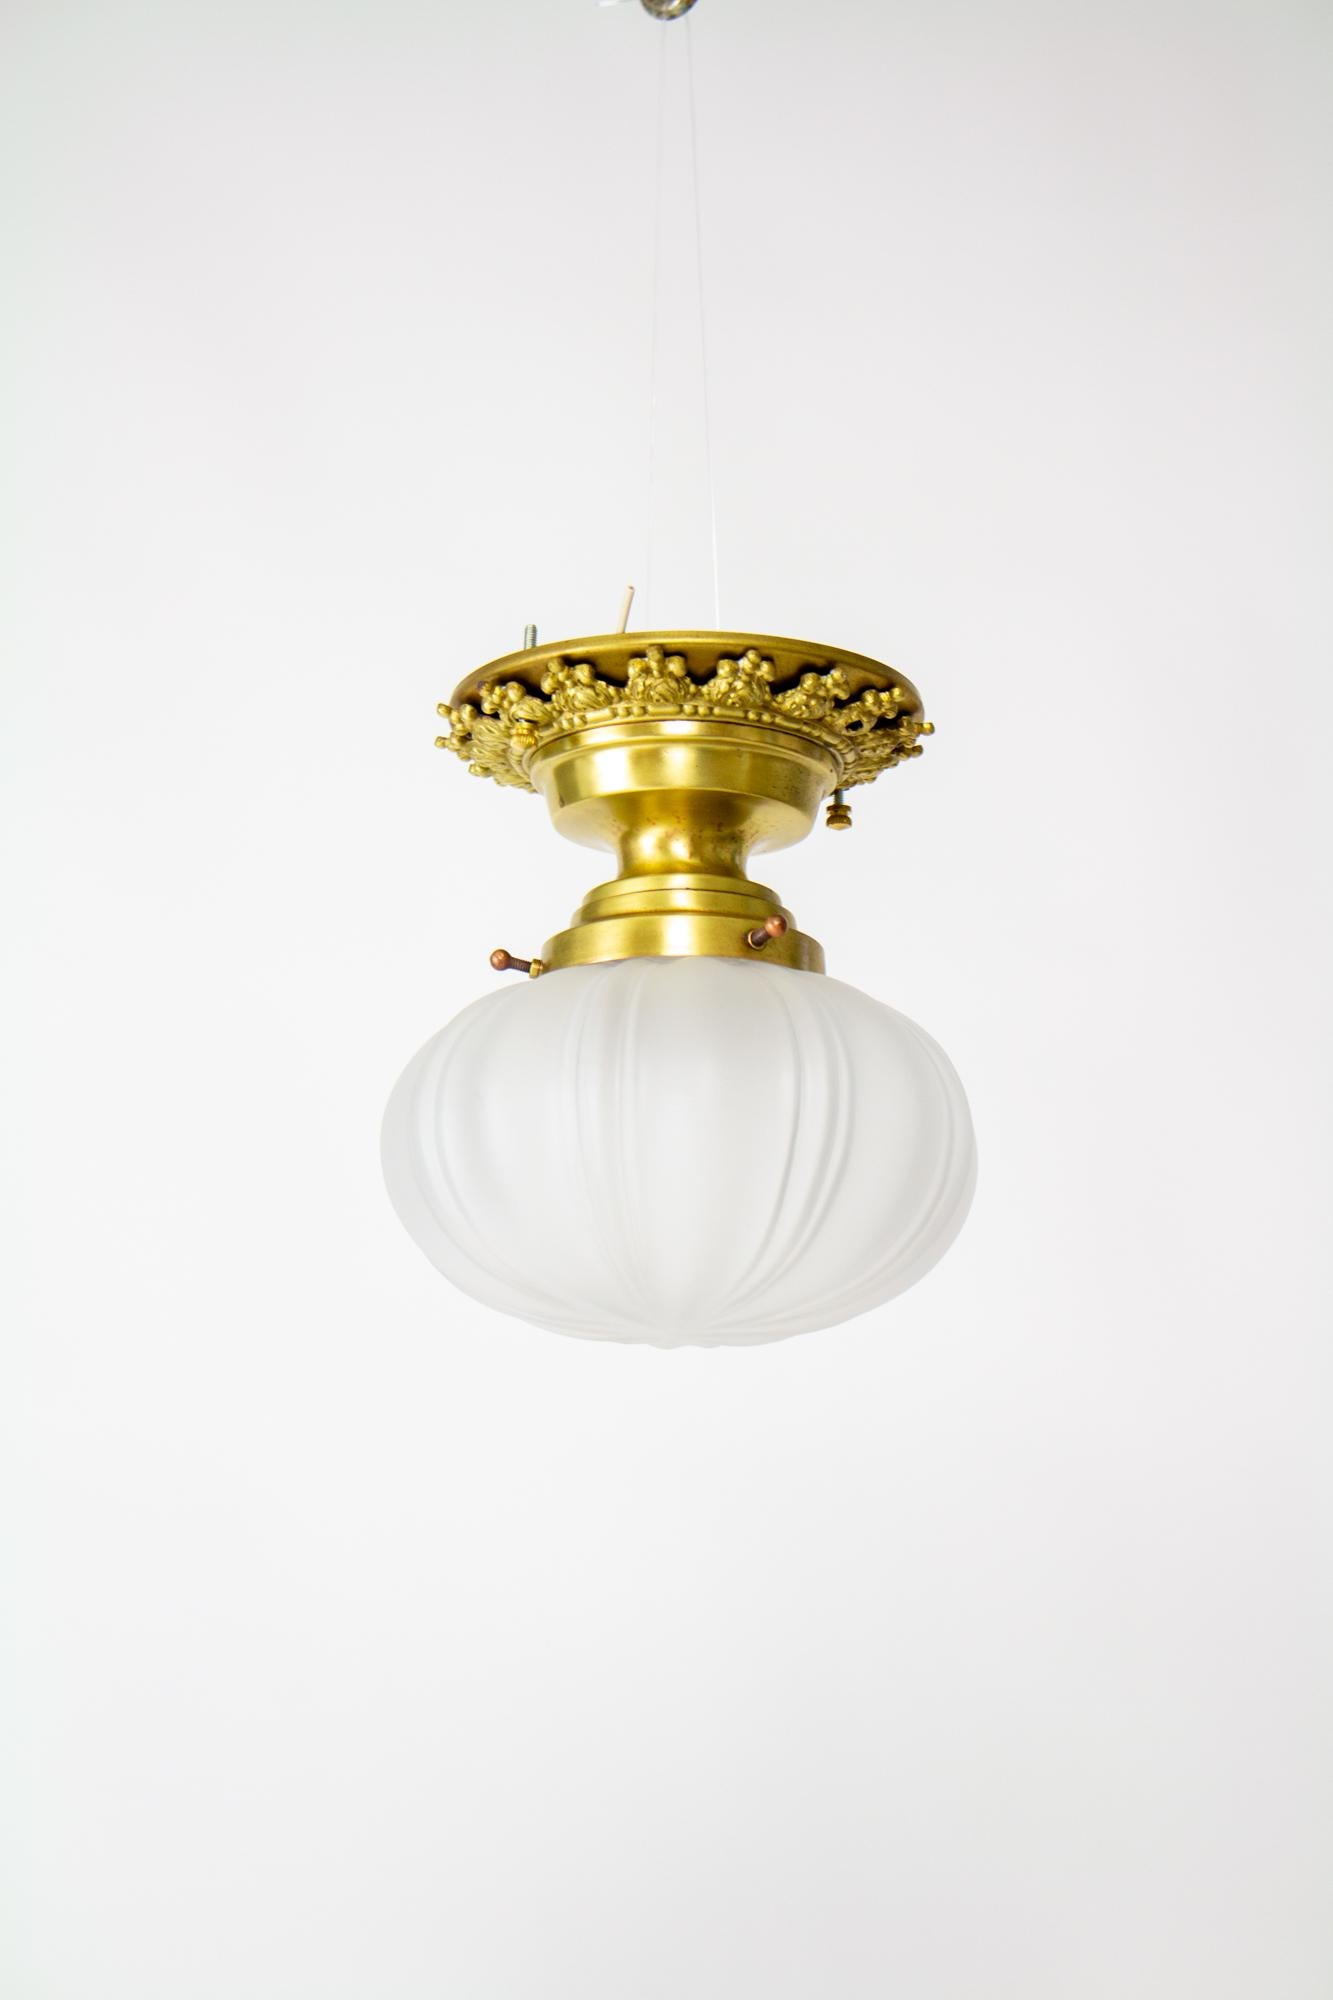 Victorian ornate flush mount with onion glass. Brass fixture has a pretty ring of decorative brass. Glass is a frosted cast glass in an onion shape. Glass in very good condition. Fixture in good condition, polished and protected, with a satin